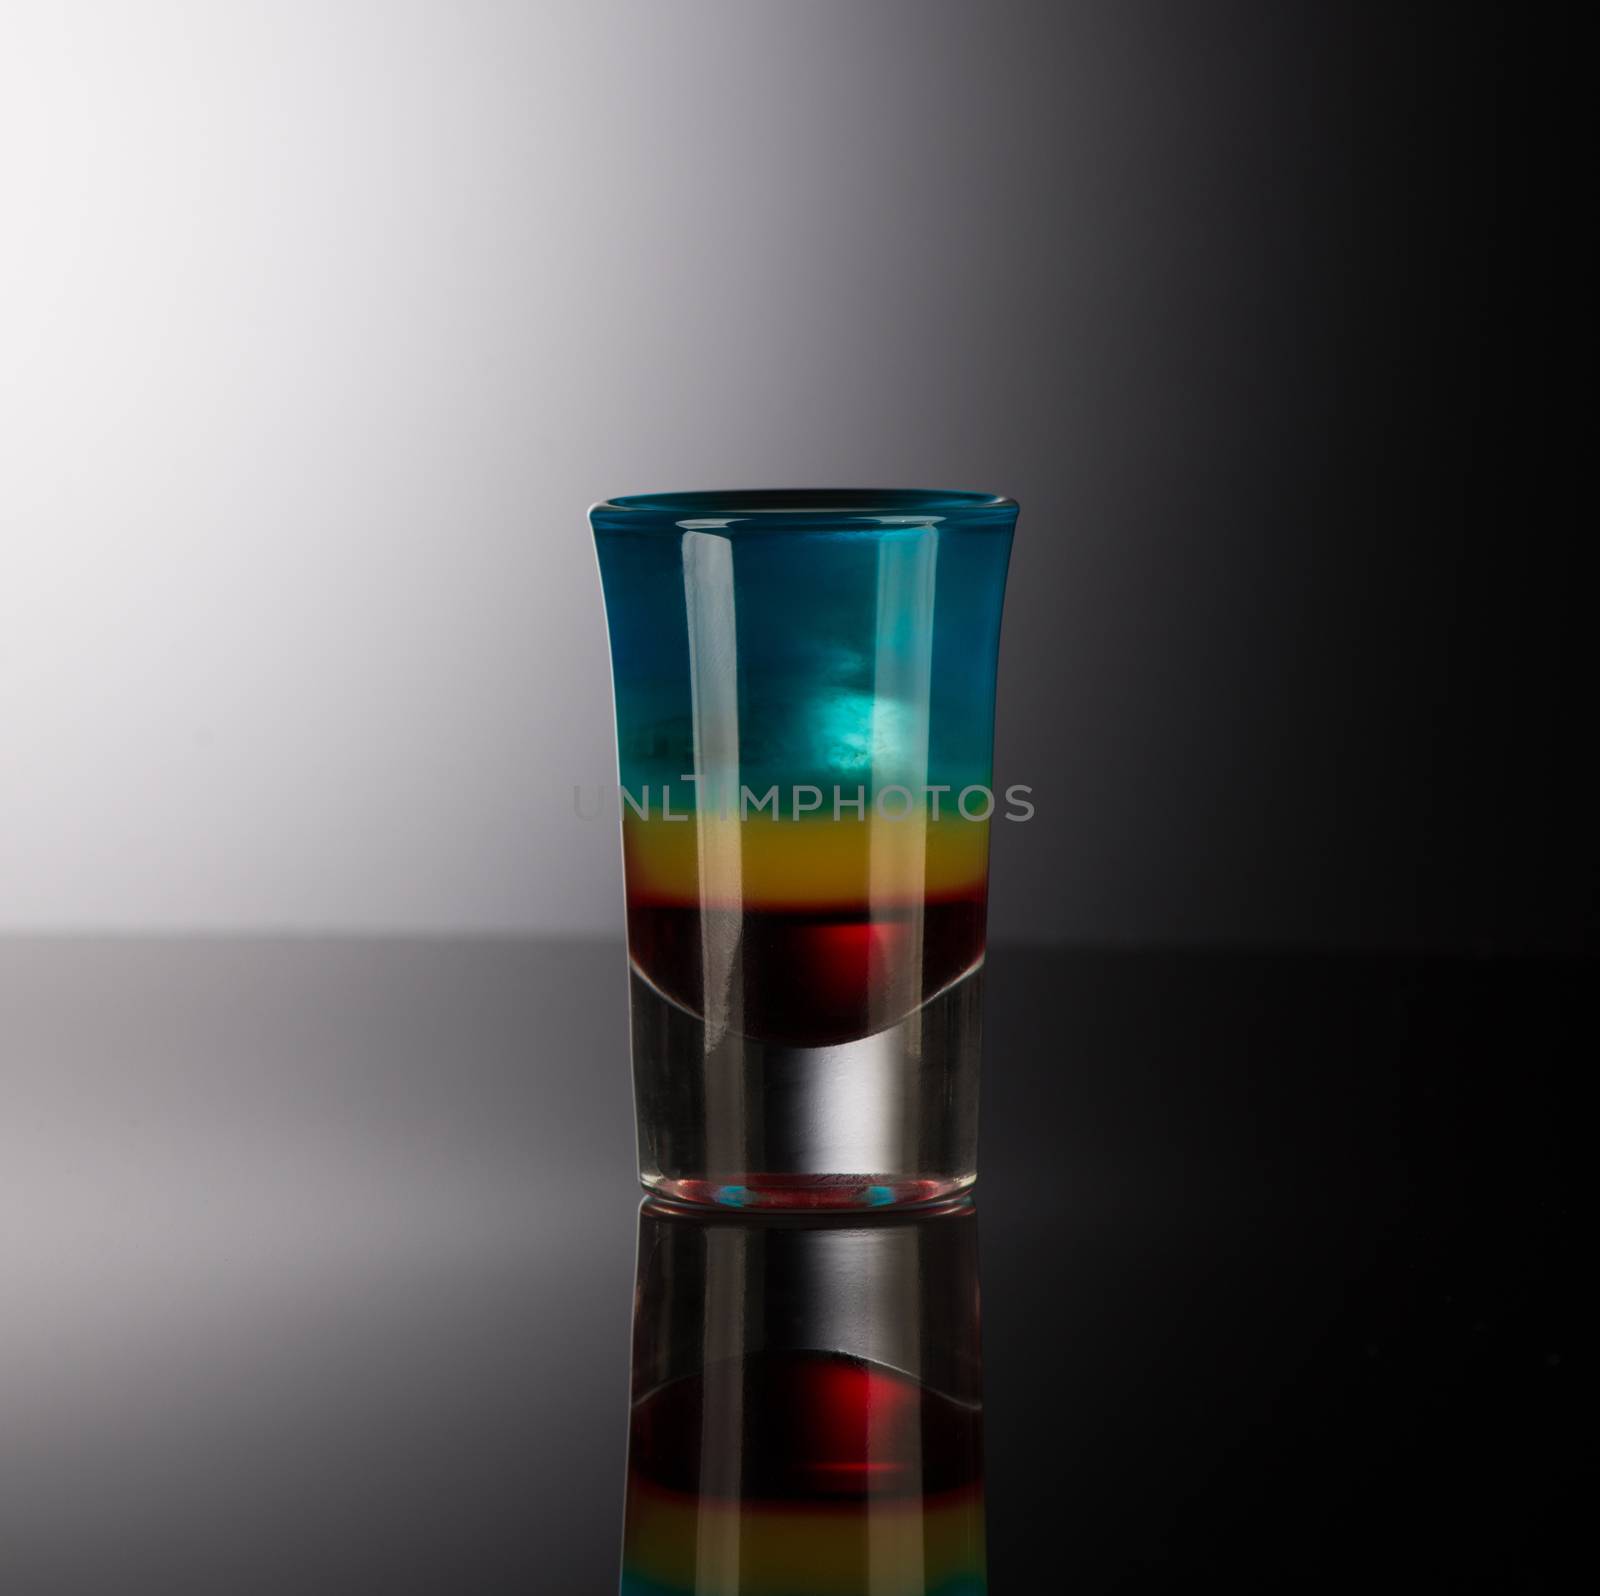 mixed alcoholic liquor in a shot glass isolated on a dark background with backlighting